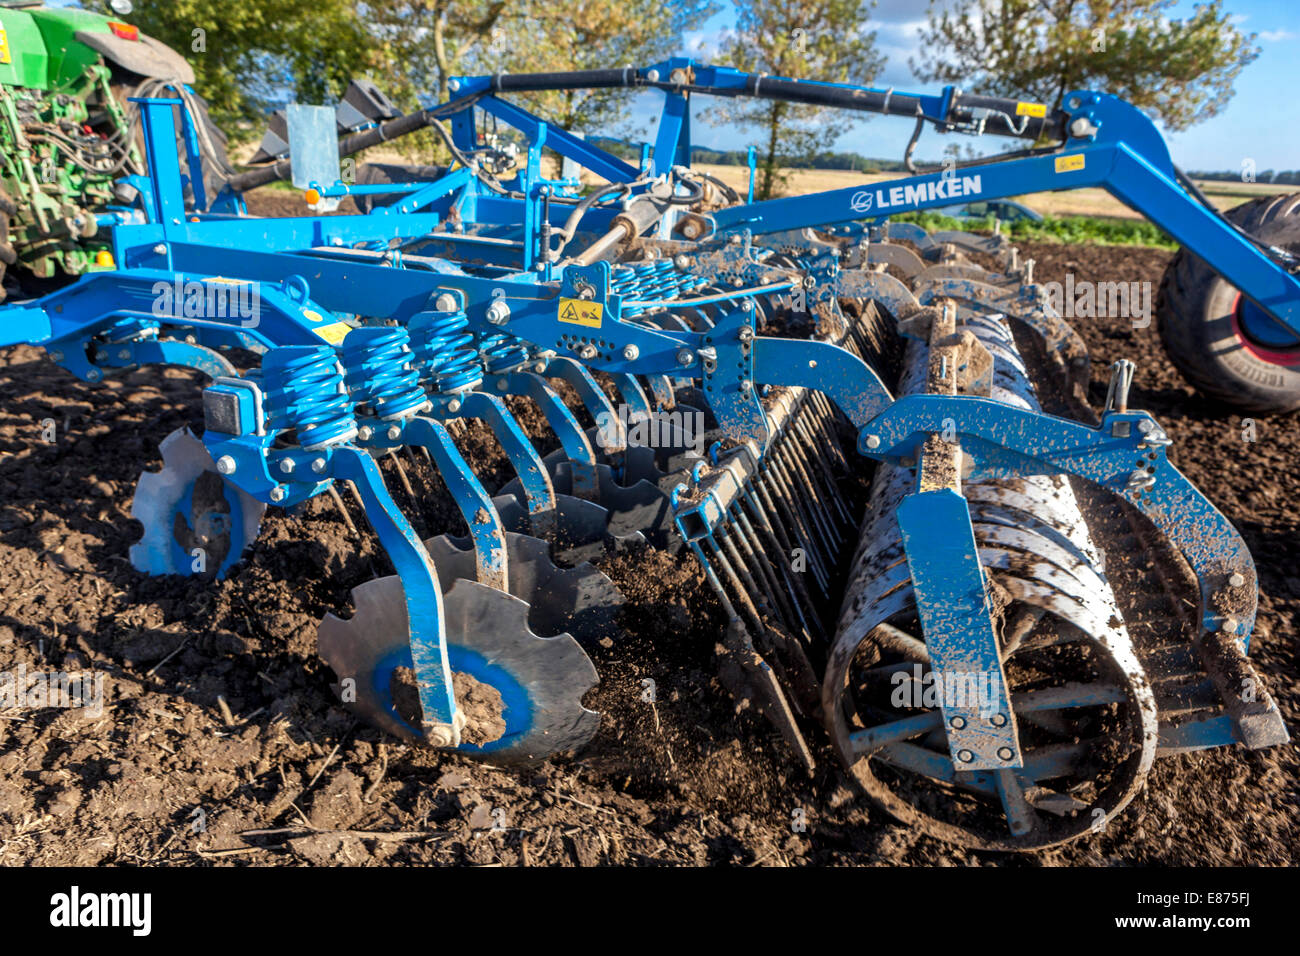 Plough Plowing machine blades plowing field Stock Photo